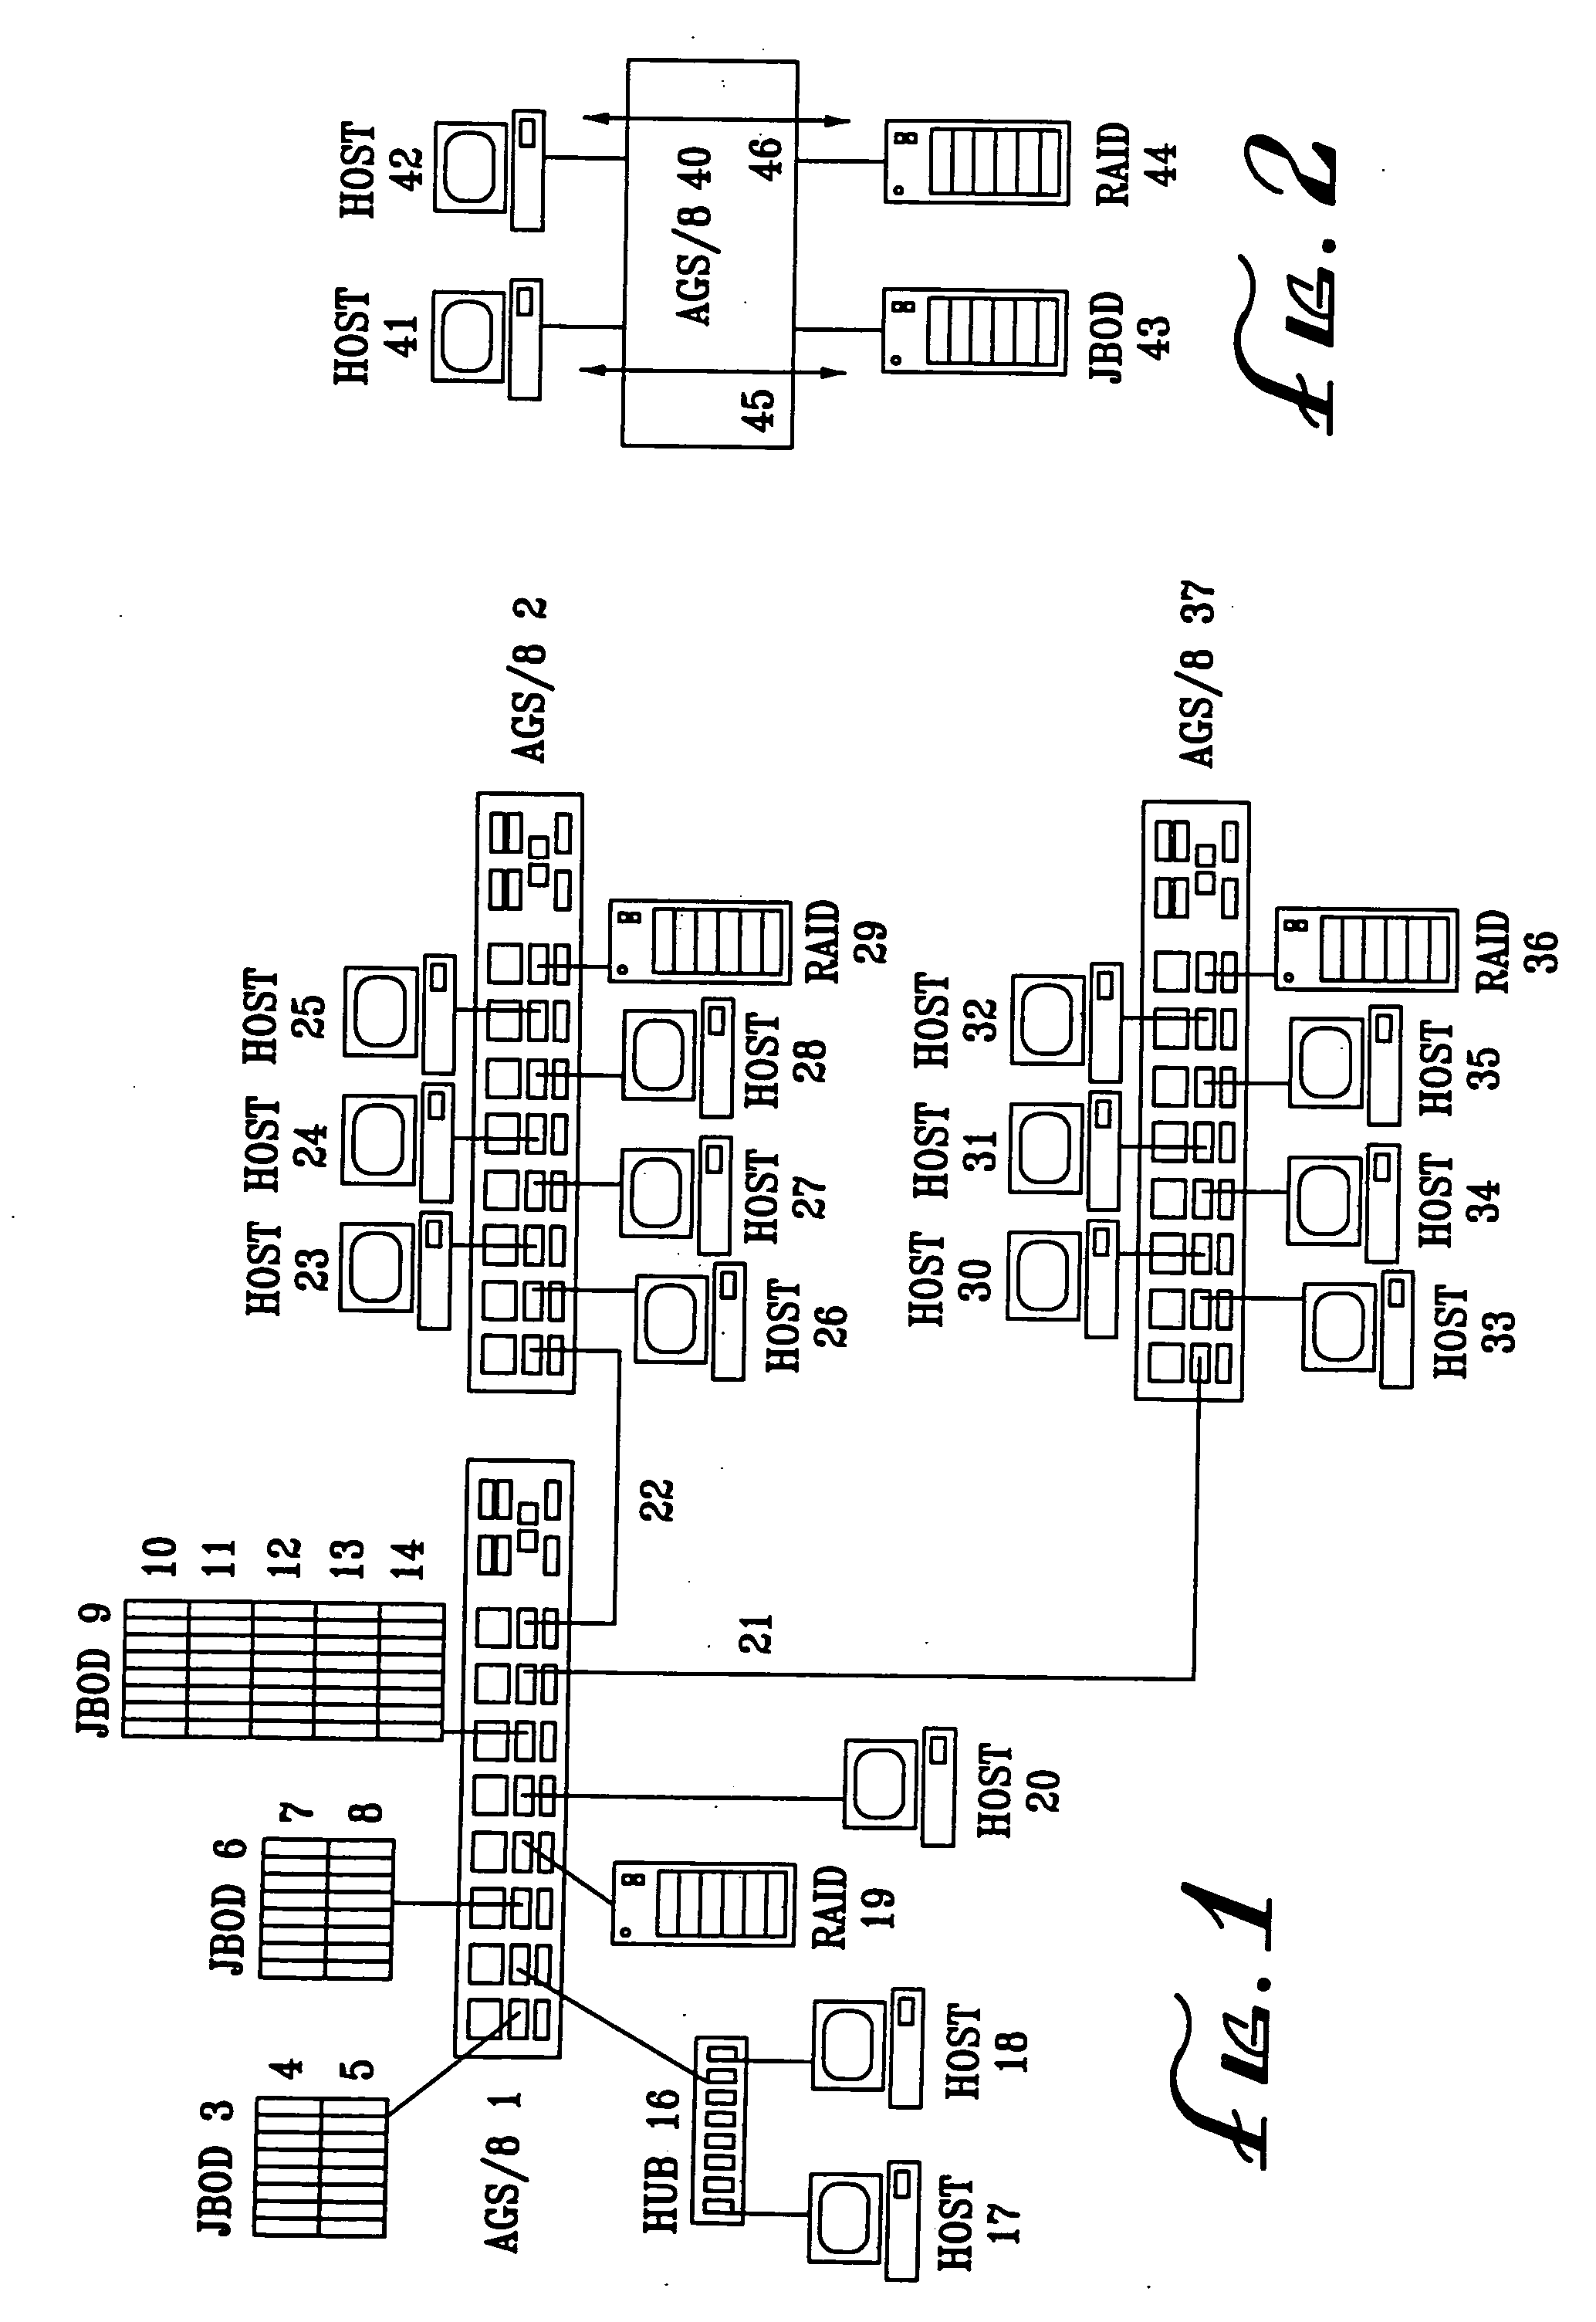 Methods and apparatus for fibre channel interconnection of private loop devices